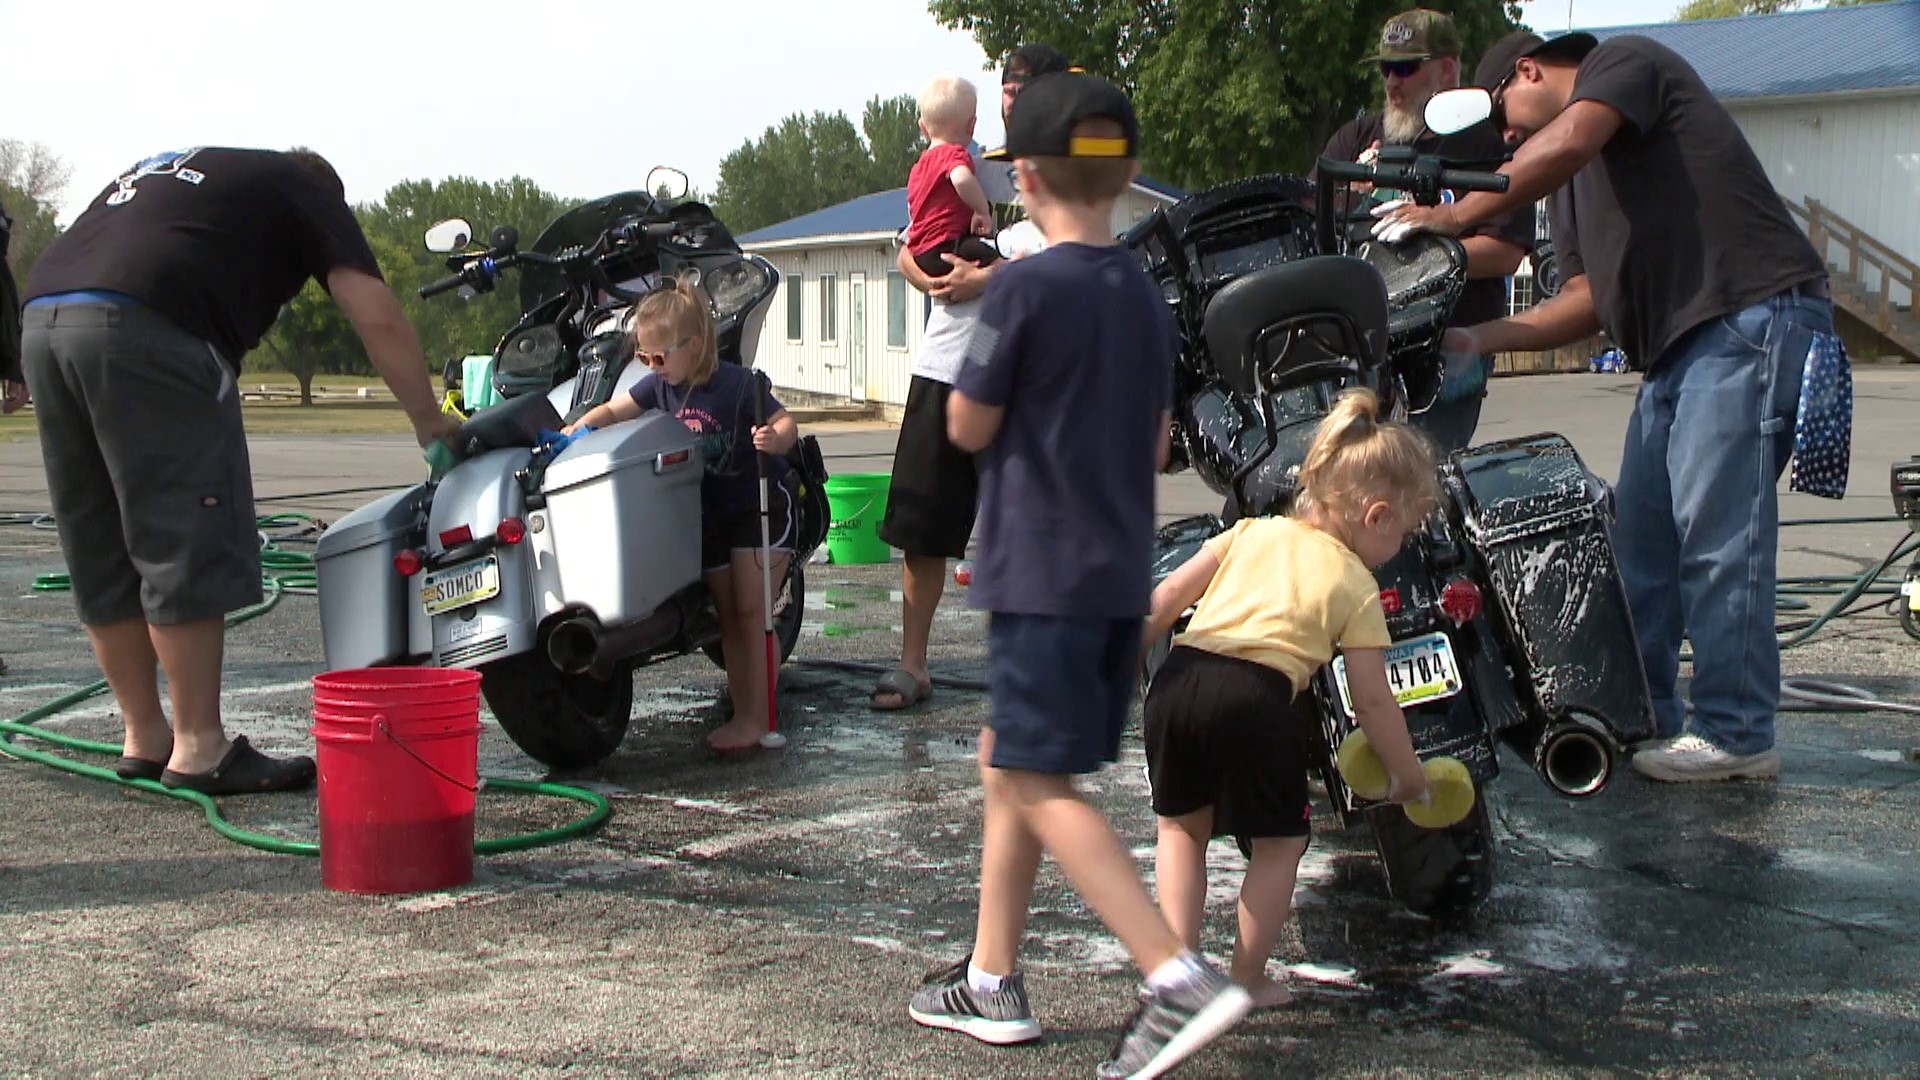 Solid Ones is a motorcycle club that serves as a non-profit, and they host car washes annually to give bikes to children's hospitals. This year, it's different.